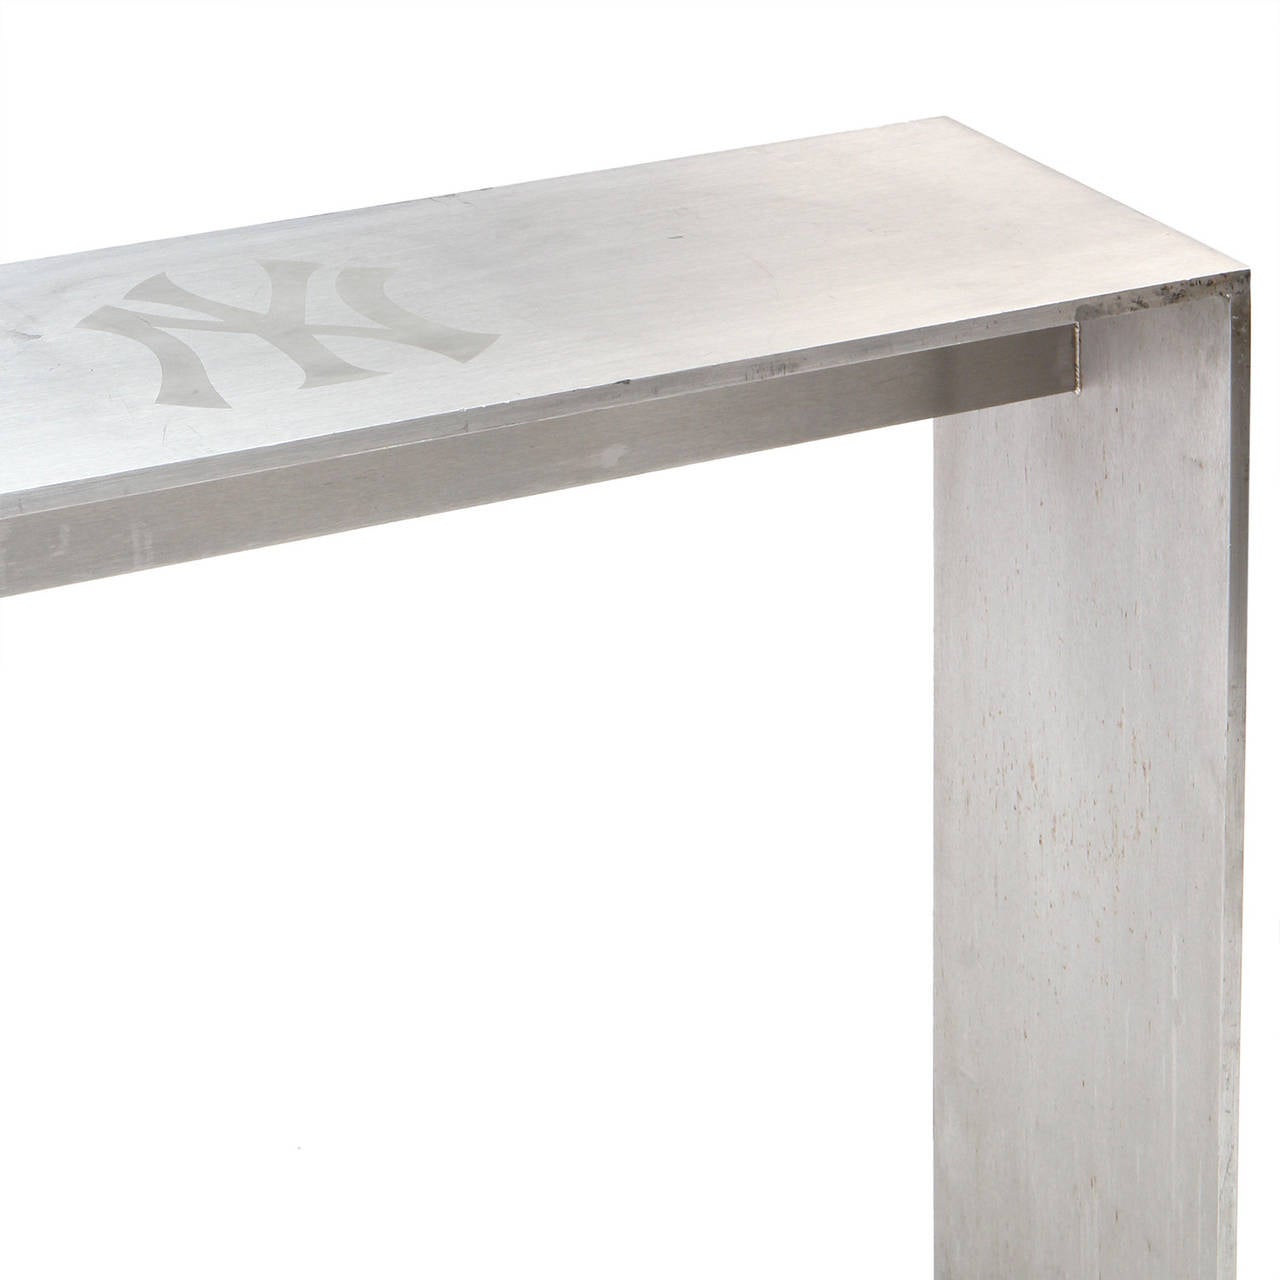 A masterfully fabricated and generously scaled rectilinear polished steel console table from New York's Yankee Stadium having inlaid Yankees logos on the top.